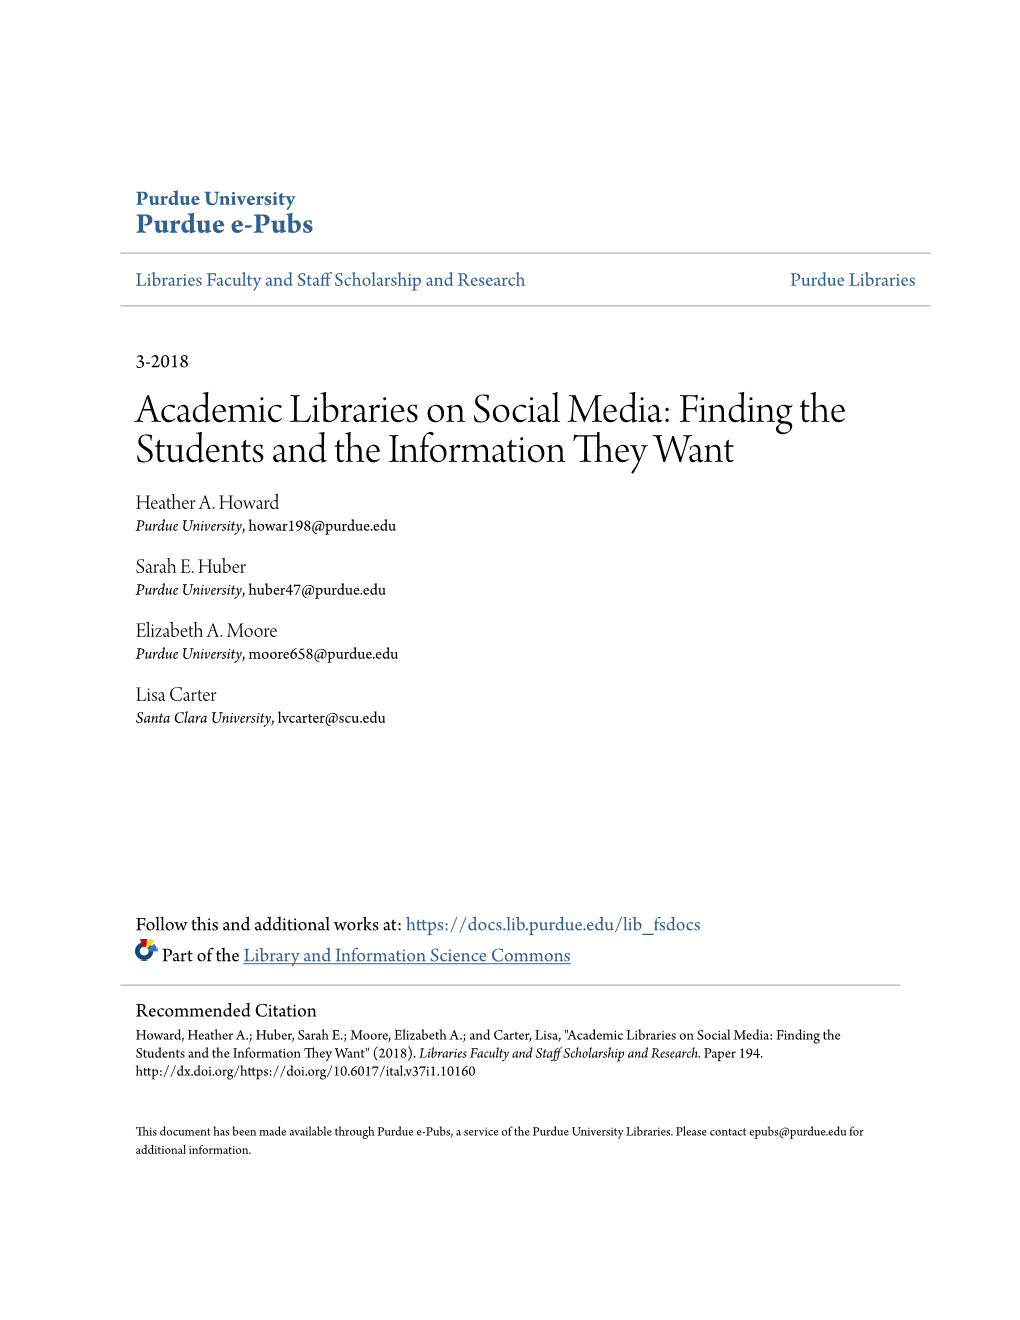 Academic Libraries on Social Media: Finding the Students and the Information They Want Heather A